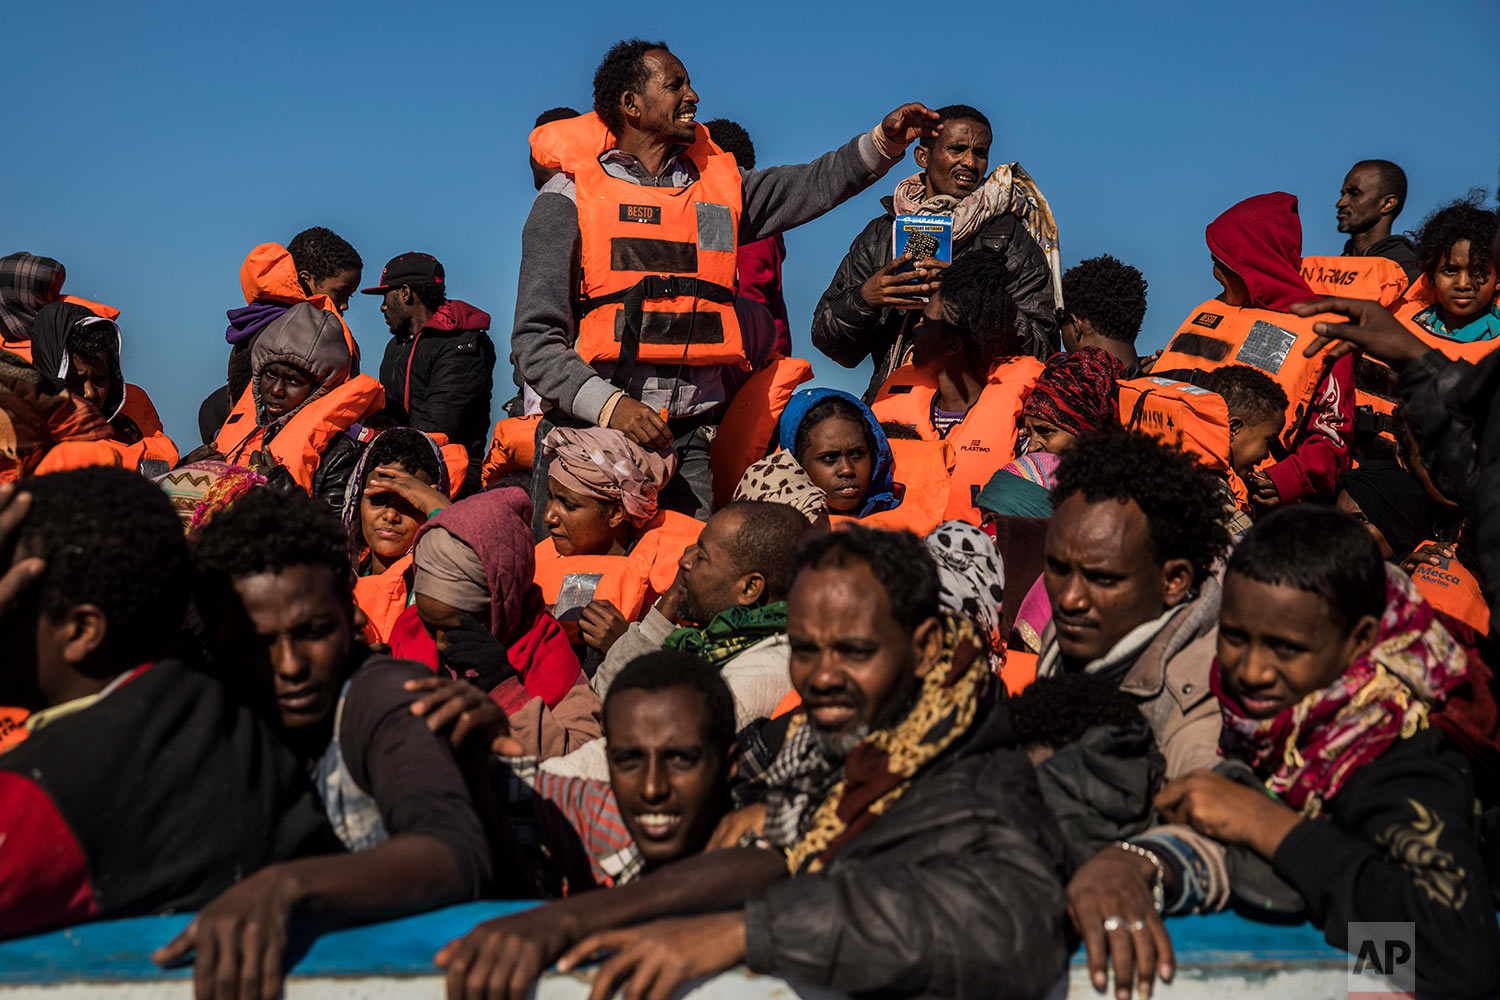  In this Tuesday, Jan. 16, 2018 photo, about 450 Sub-Saharan refugees and migrants, mostly from Eritrea, wait to be rescued by aid workers of Spanish NGO Proactiva Open Arms, as they were trying to leave the Libyan coast and reach European soil aboard an overcrowded wooden boat, 34 miles north of Kasr-El-Karabulli, Libya. (AP Photo/Santi Palacios) |&nbsp; See these photos on AP Images  